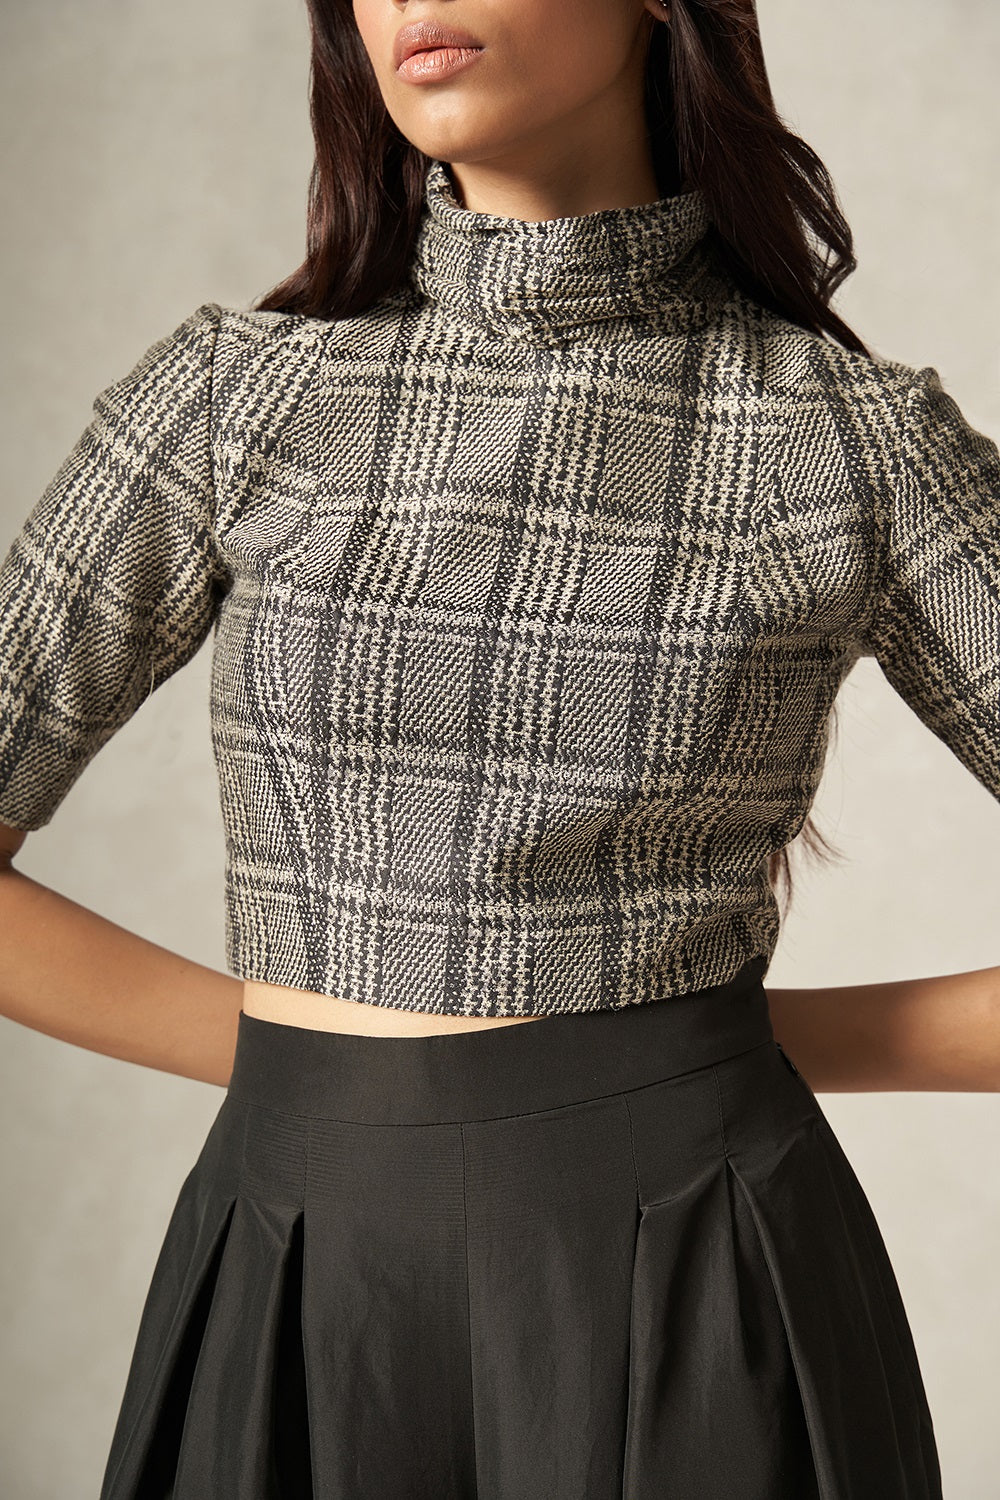 Black and White Pure Silk Handwoven Plaid Patterned High Neck Top